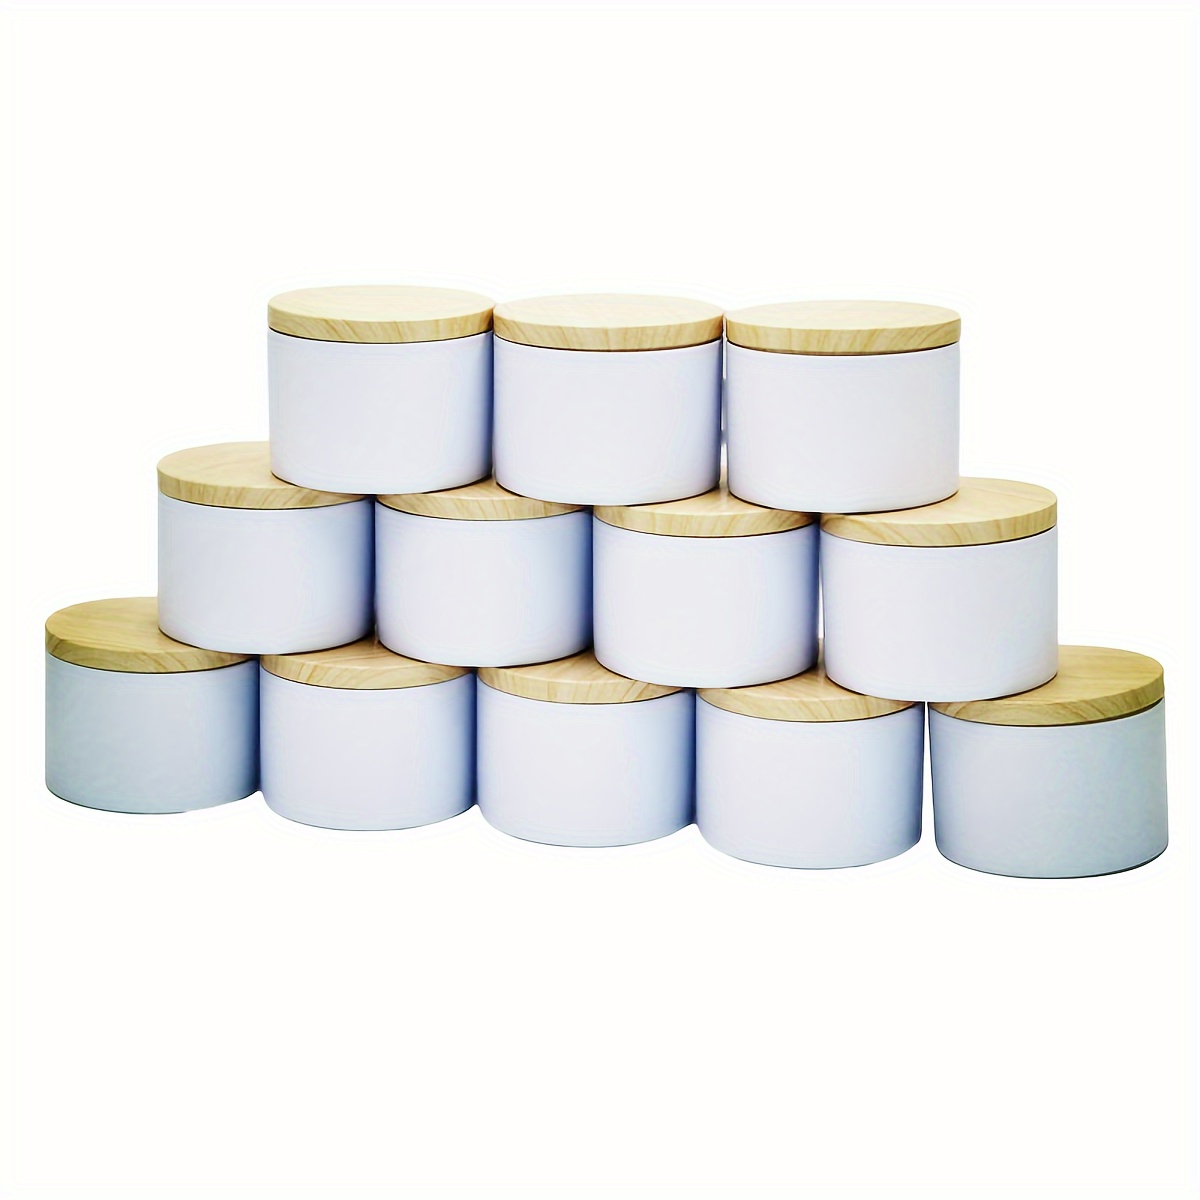 

12pcs 4oz Candle Tins With Lids, Round Metal Candle Jars Kit For Loose Candles, Used For Diy Storage, Candle Making Supplies, Empty Candle Cans